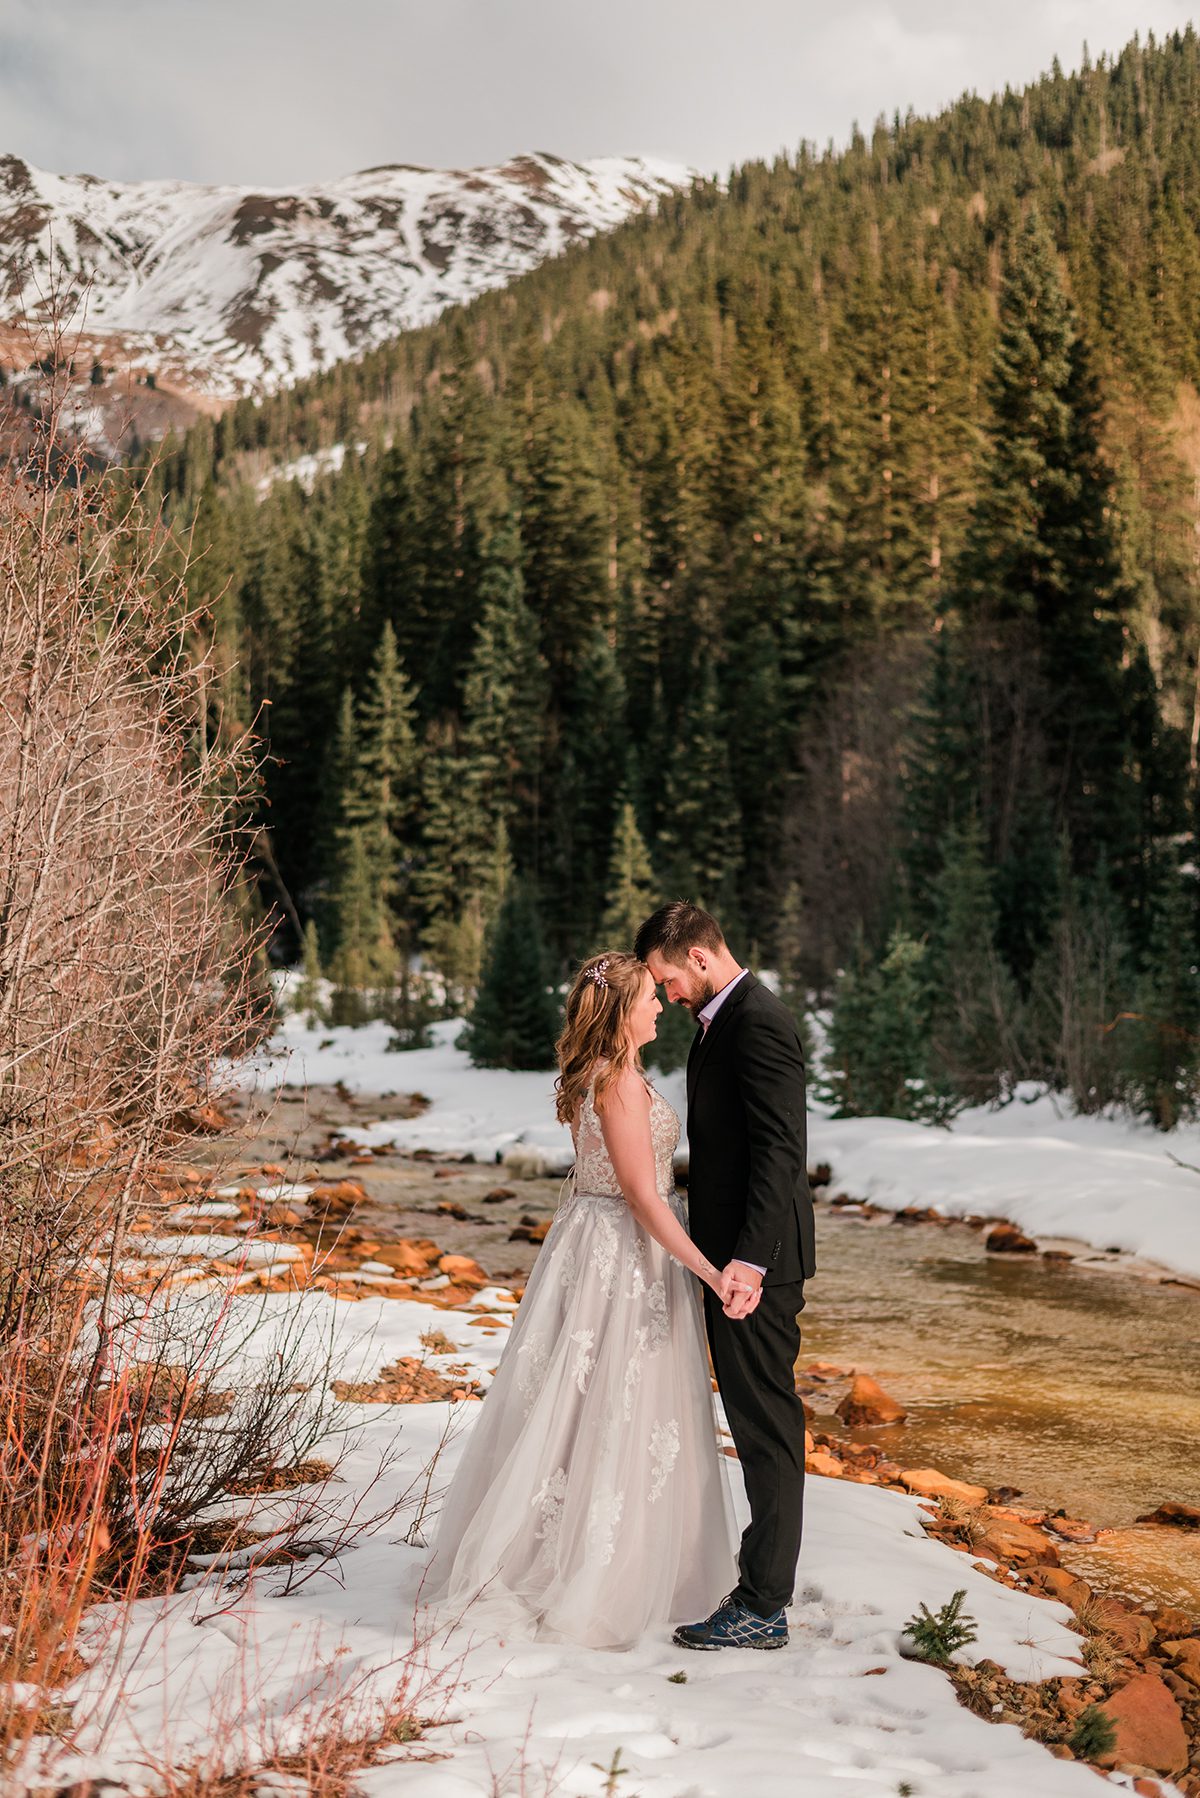 Erin & Bryton | Ouray Ghost Town Elopement